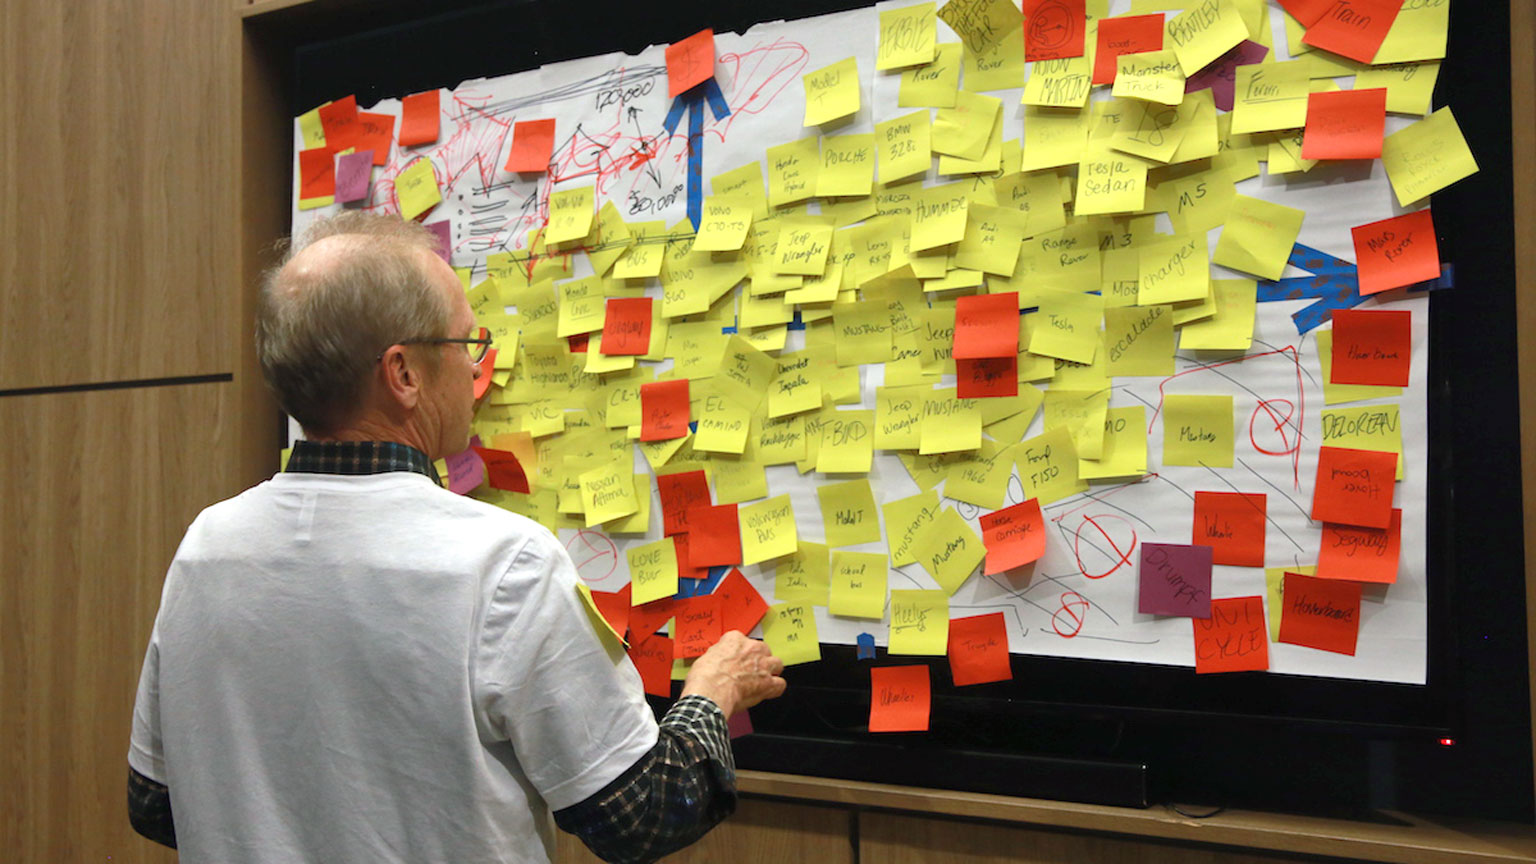 A professor scans over a wall papered with concepts on sticky notes - the result of a class in the Design Bloc course on Design Thinking